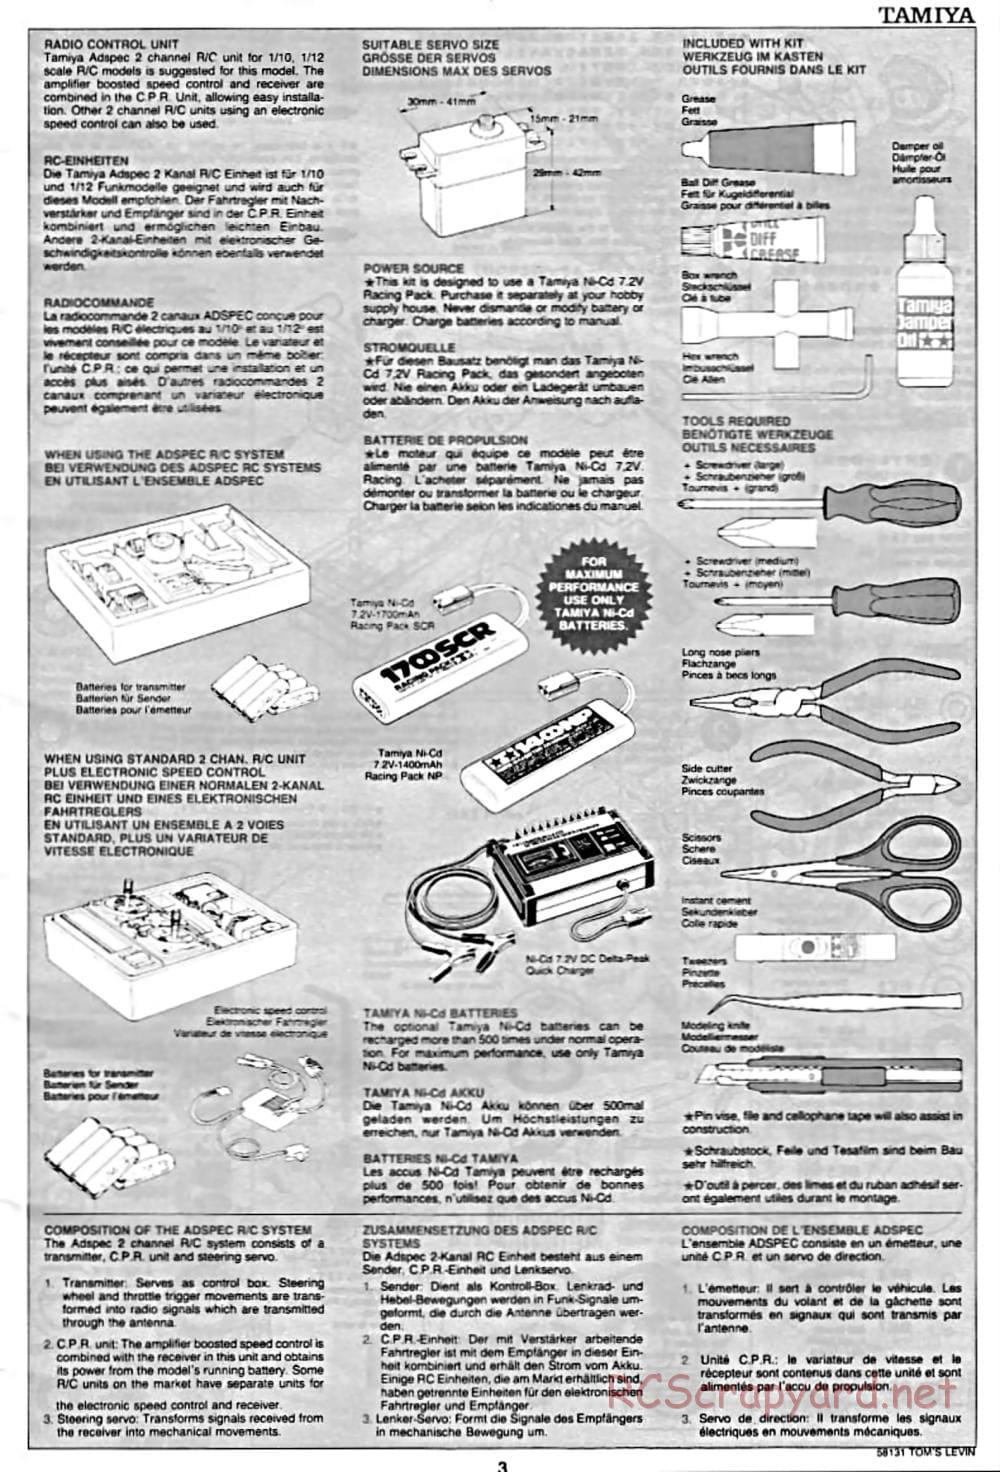 Tamiya - Toyota Tom's Levin - FF-01 Chassis - Manual - Page 3